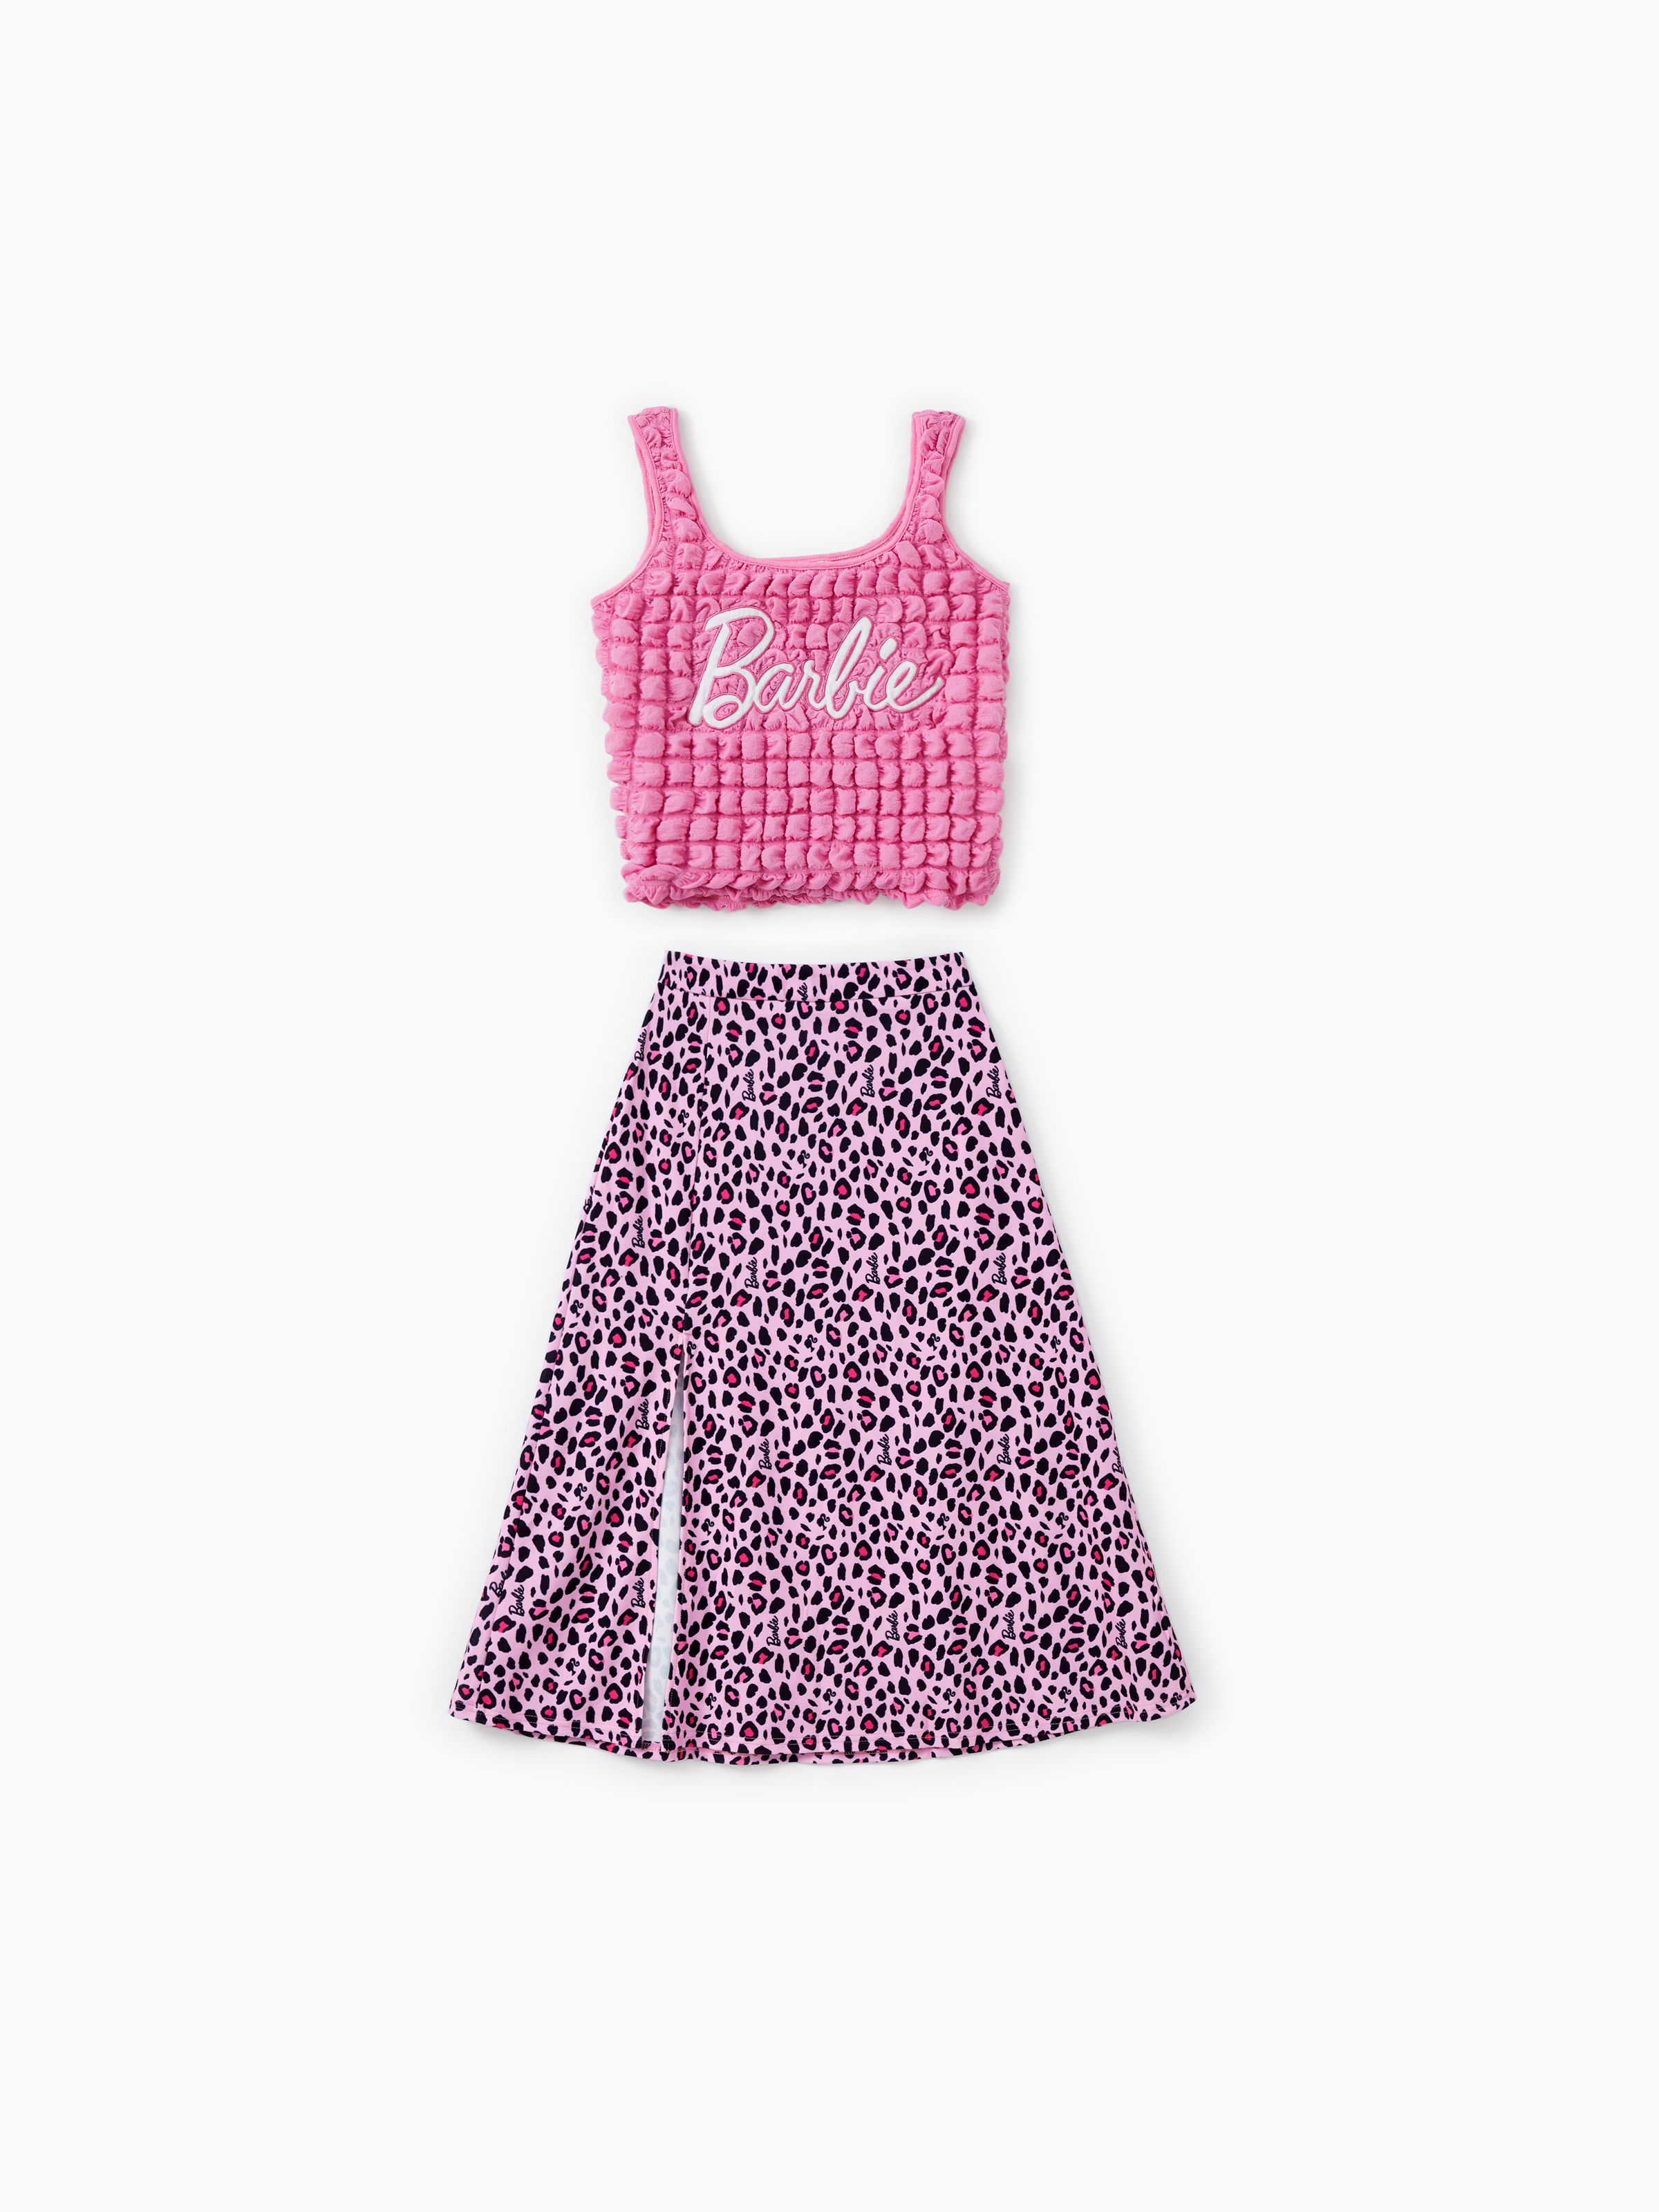 

Barbie Mommy and Me Logo Embroidered Textured Fabric Tank Top and Allover Leopard Print Skirt Set